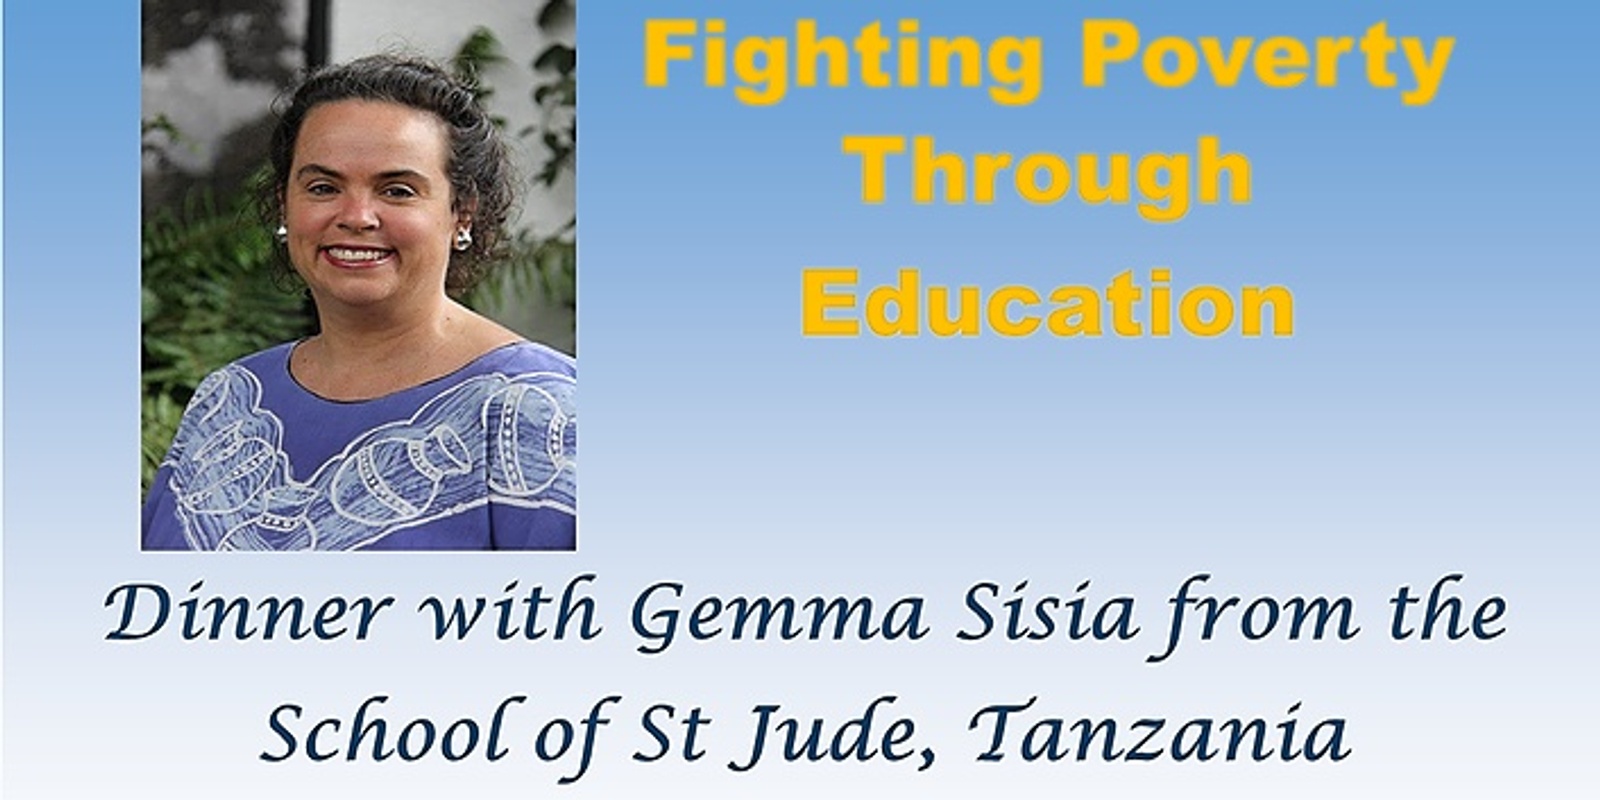 Banner image for Fighting Poverty Through Education - Dinner with Gemma Sisia